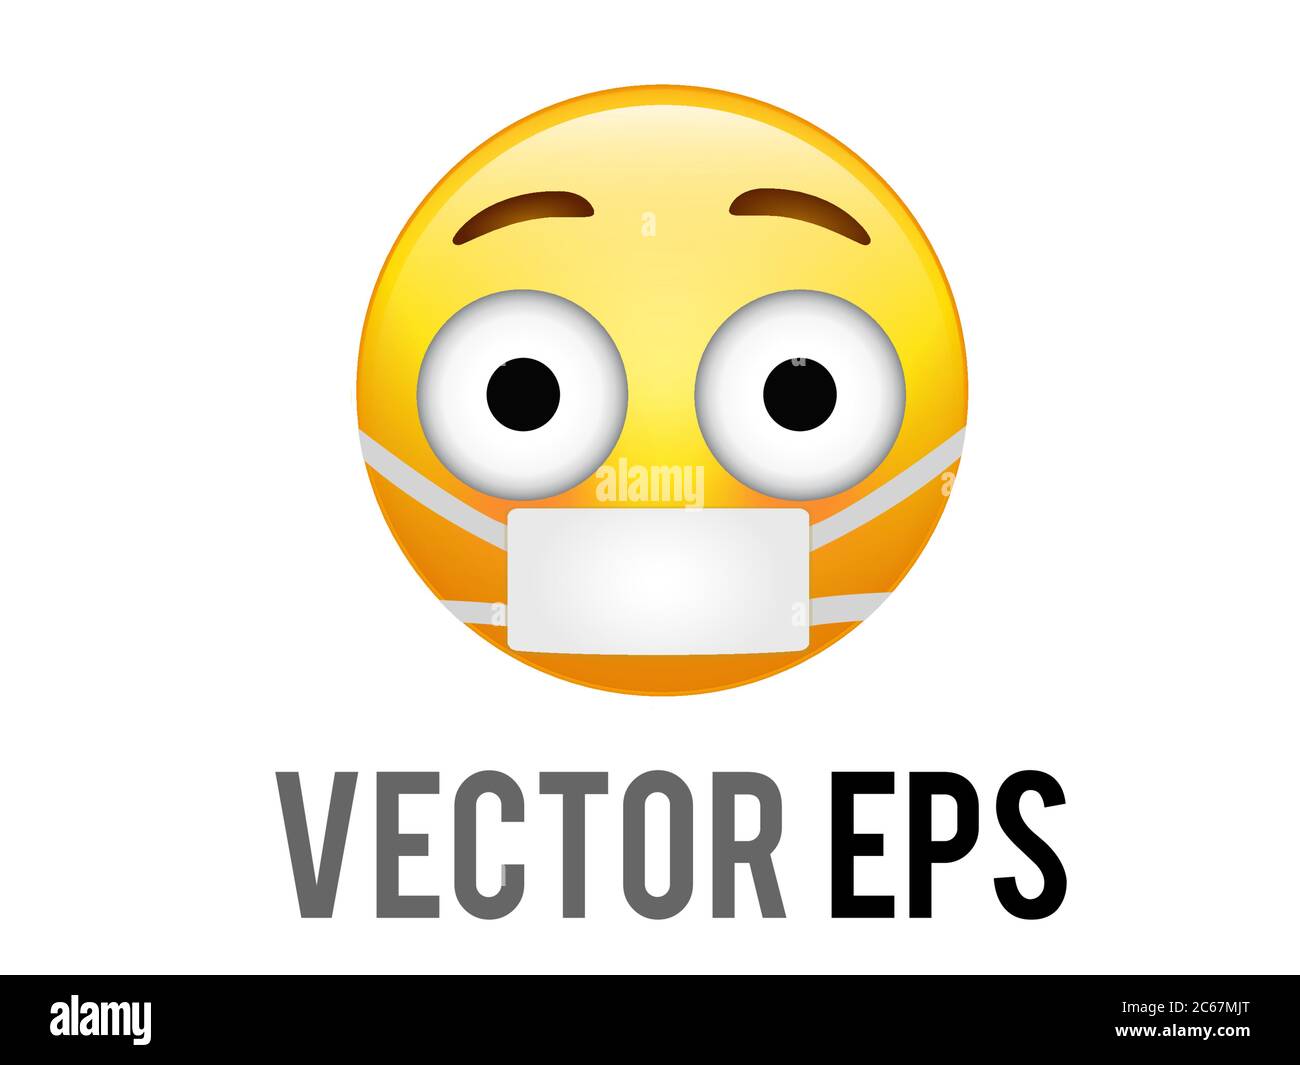 The isolated vector yellow embarrassed face icon with flushed red cheeks and mask Stock Vector